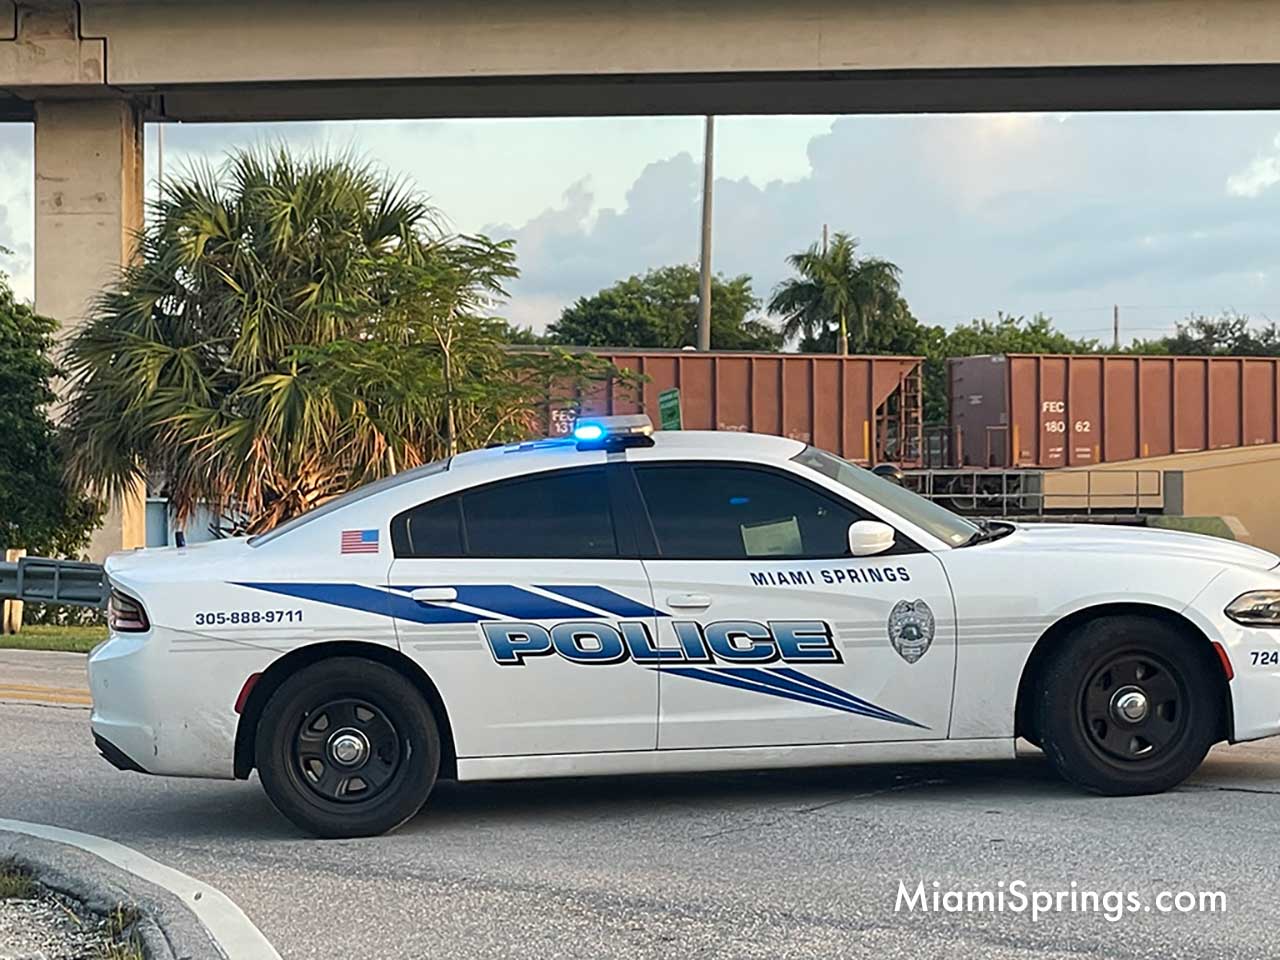 Miami Springs Police Shut Down Traffic on N Royal Poinciana Blvd During Police Investigation